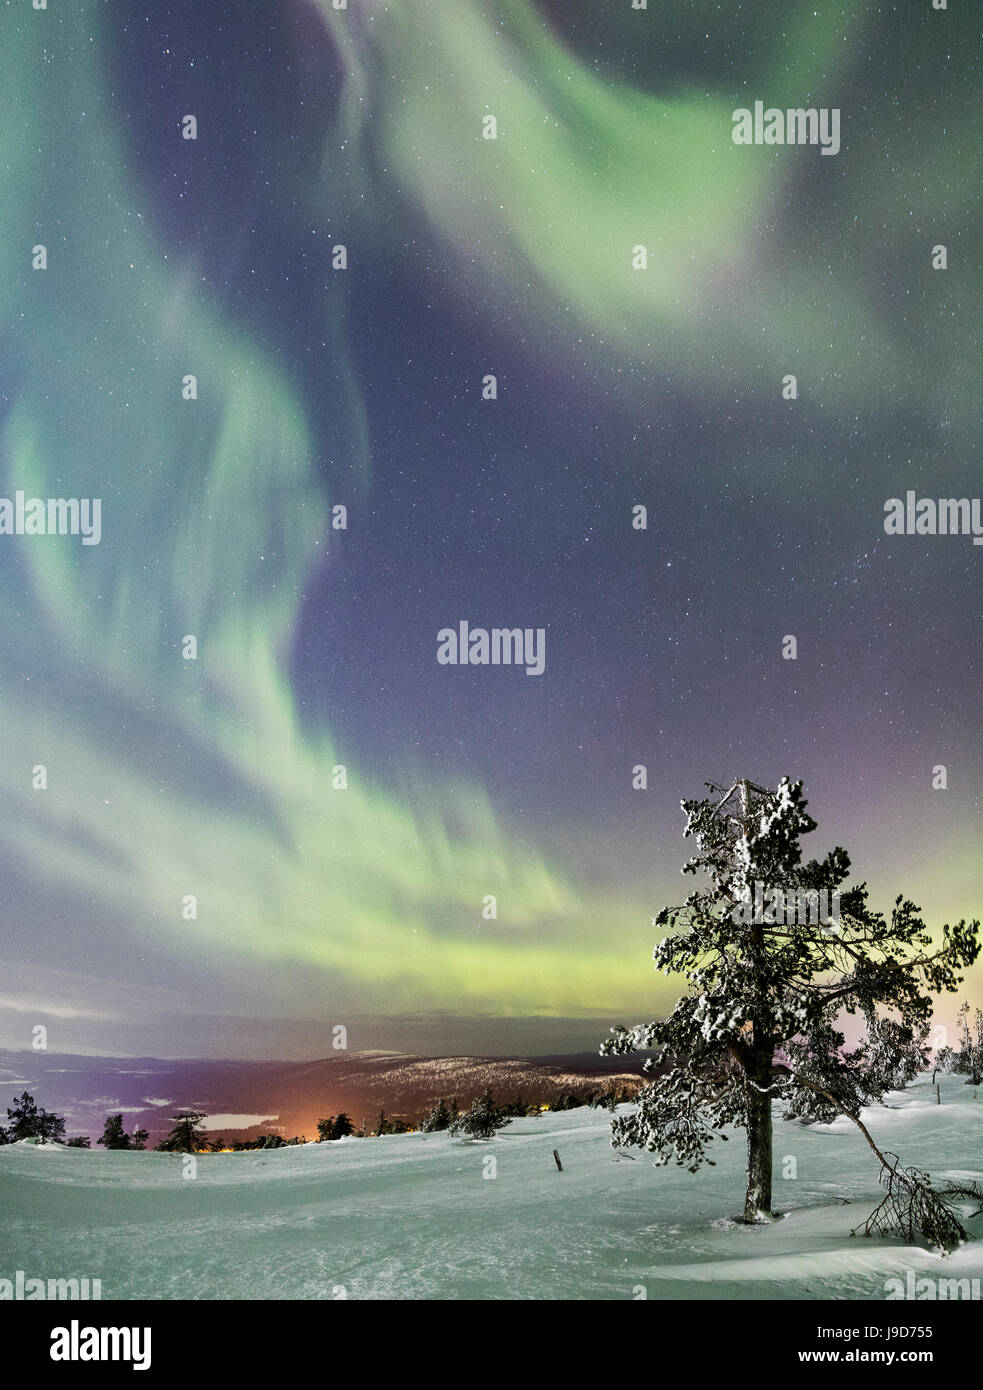 Panorama of snowy woods and frozen trees framed by Northern Lights (Aurora Borealis) and stars, Levi, Sirkka, Kittila, Finland Stock Photo